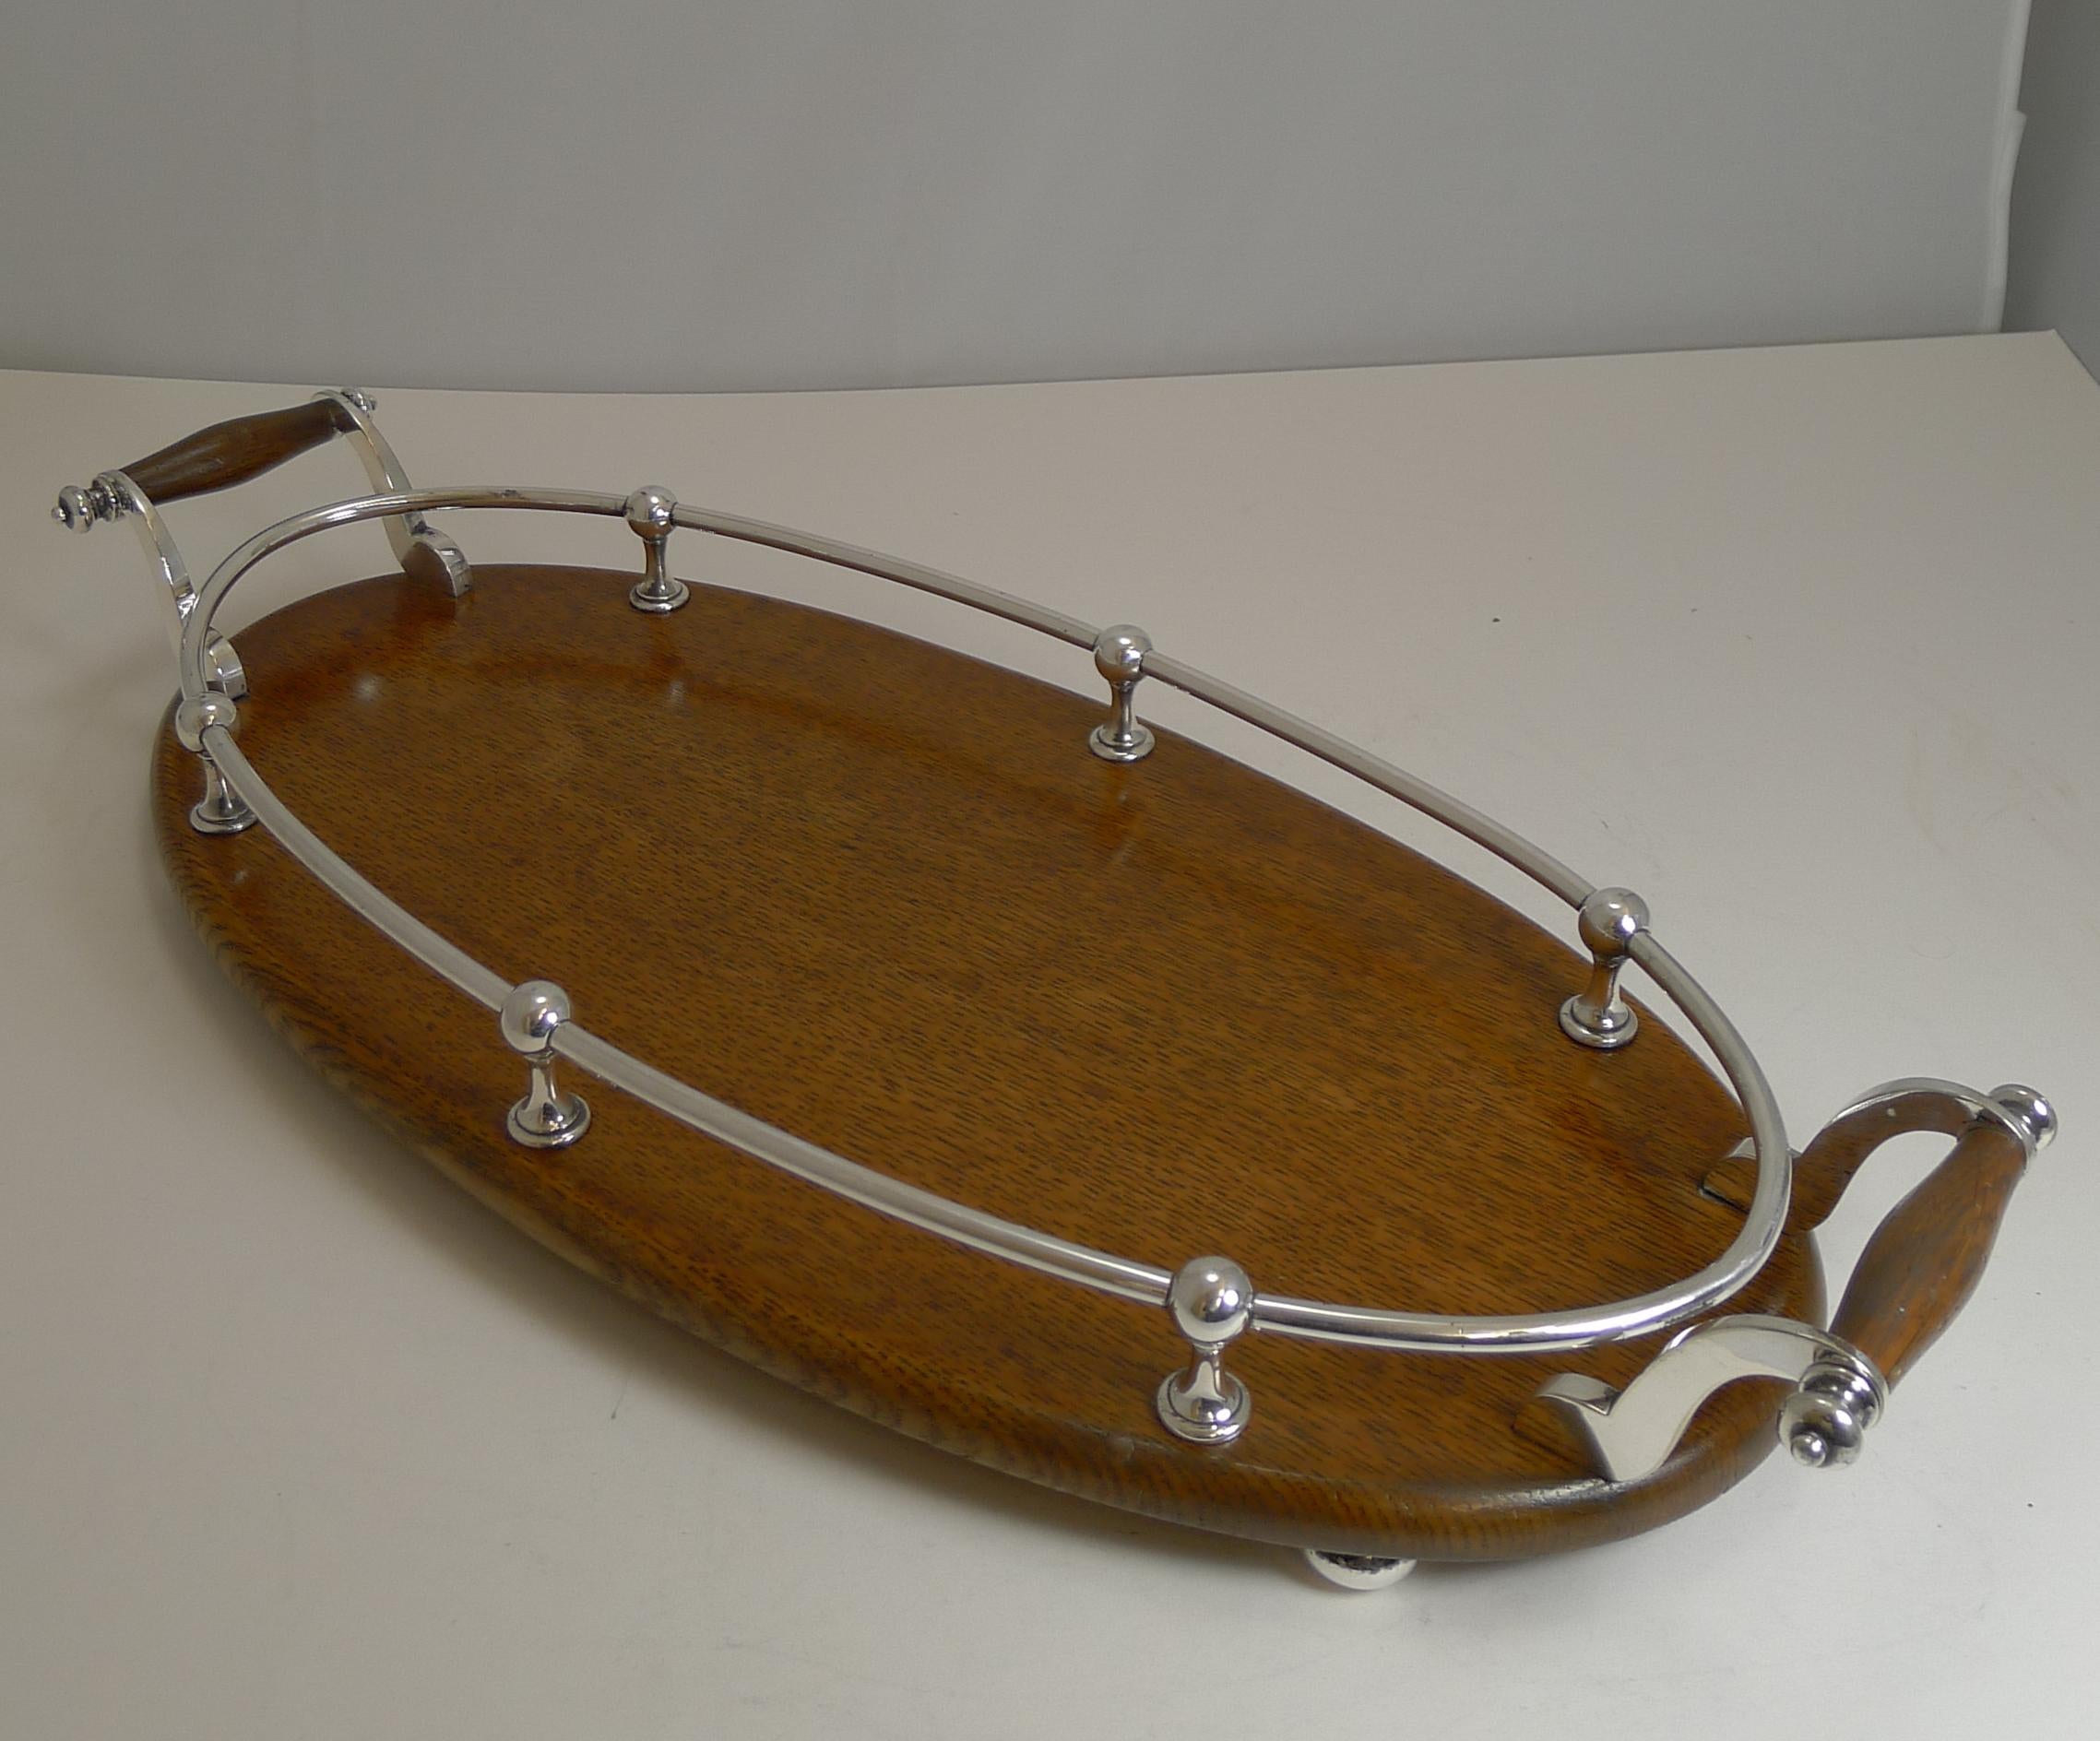 An unusual example of a late Victorian or early Edwardian serving / drinks tray, a smaller size than most and a lovely elegant slim and long oval.

Made from solid English Oak, the fittings are all made from EPNS (electro-plated nickel silver).